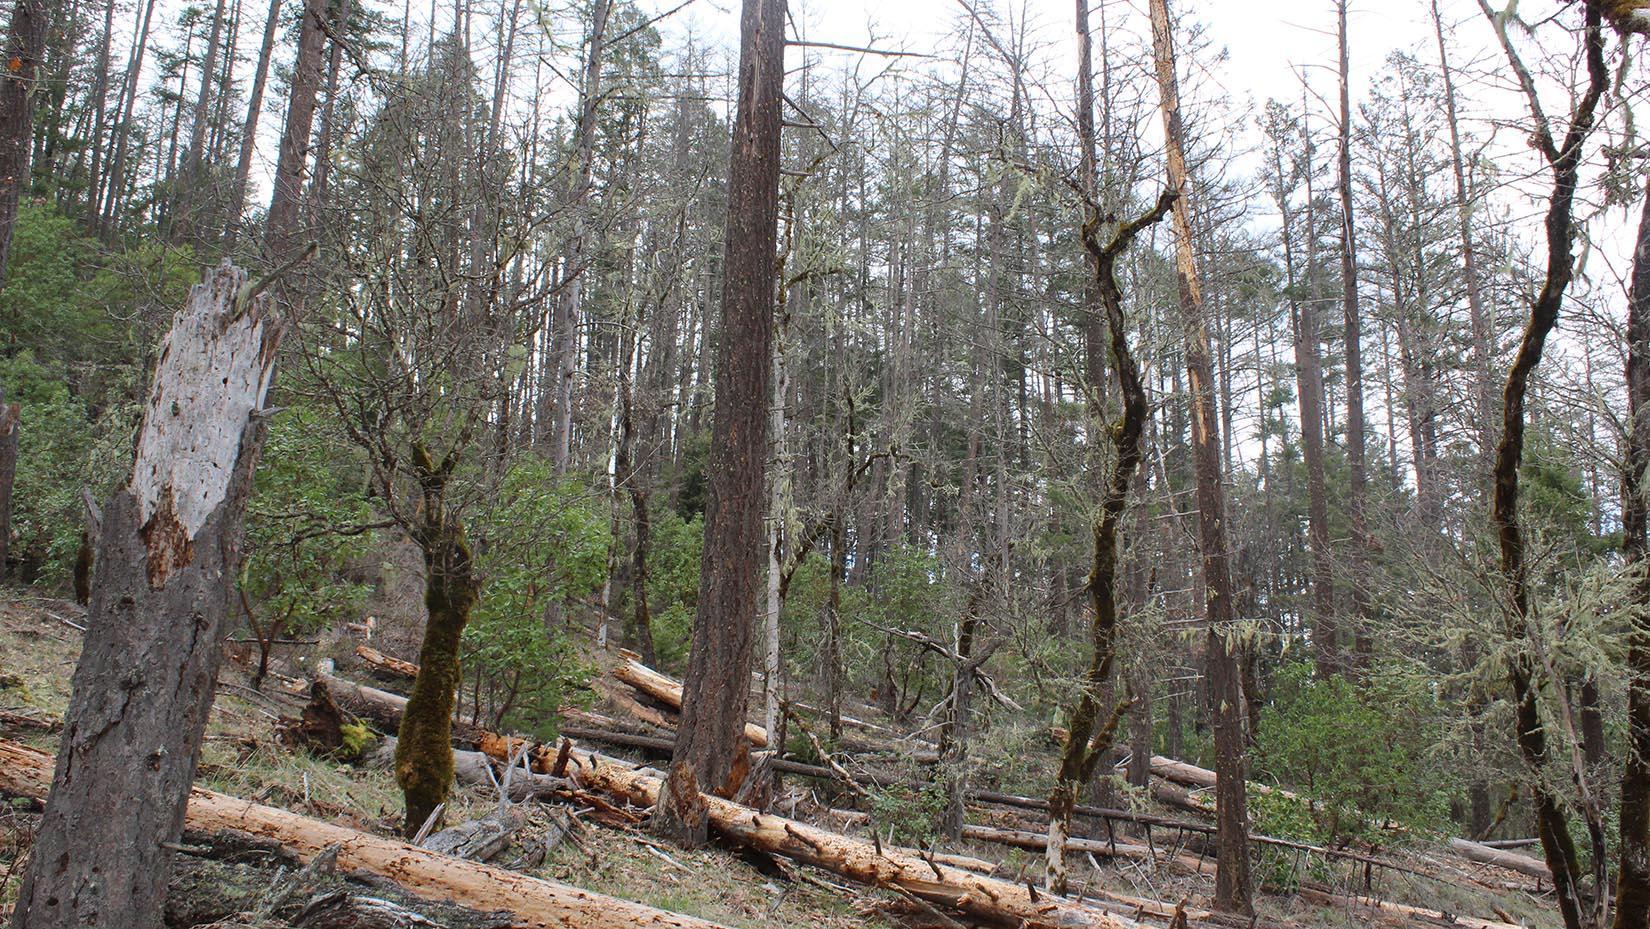 snags and downed wood in a patch of forest